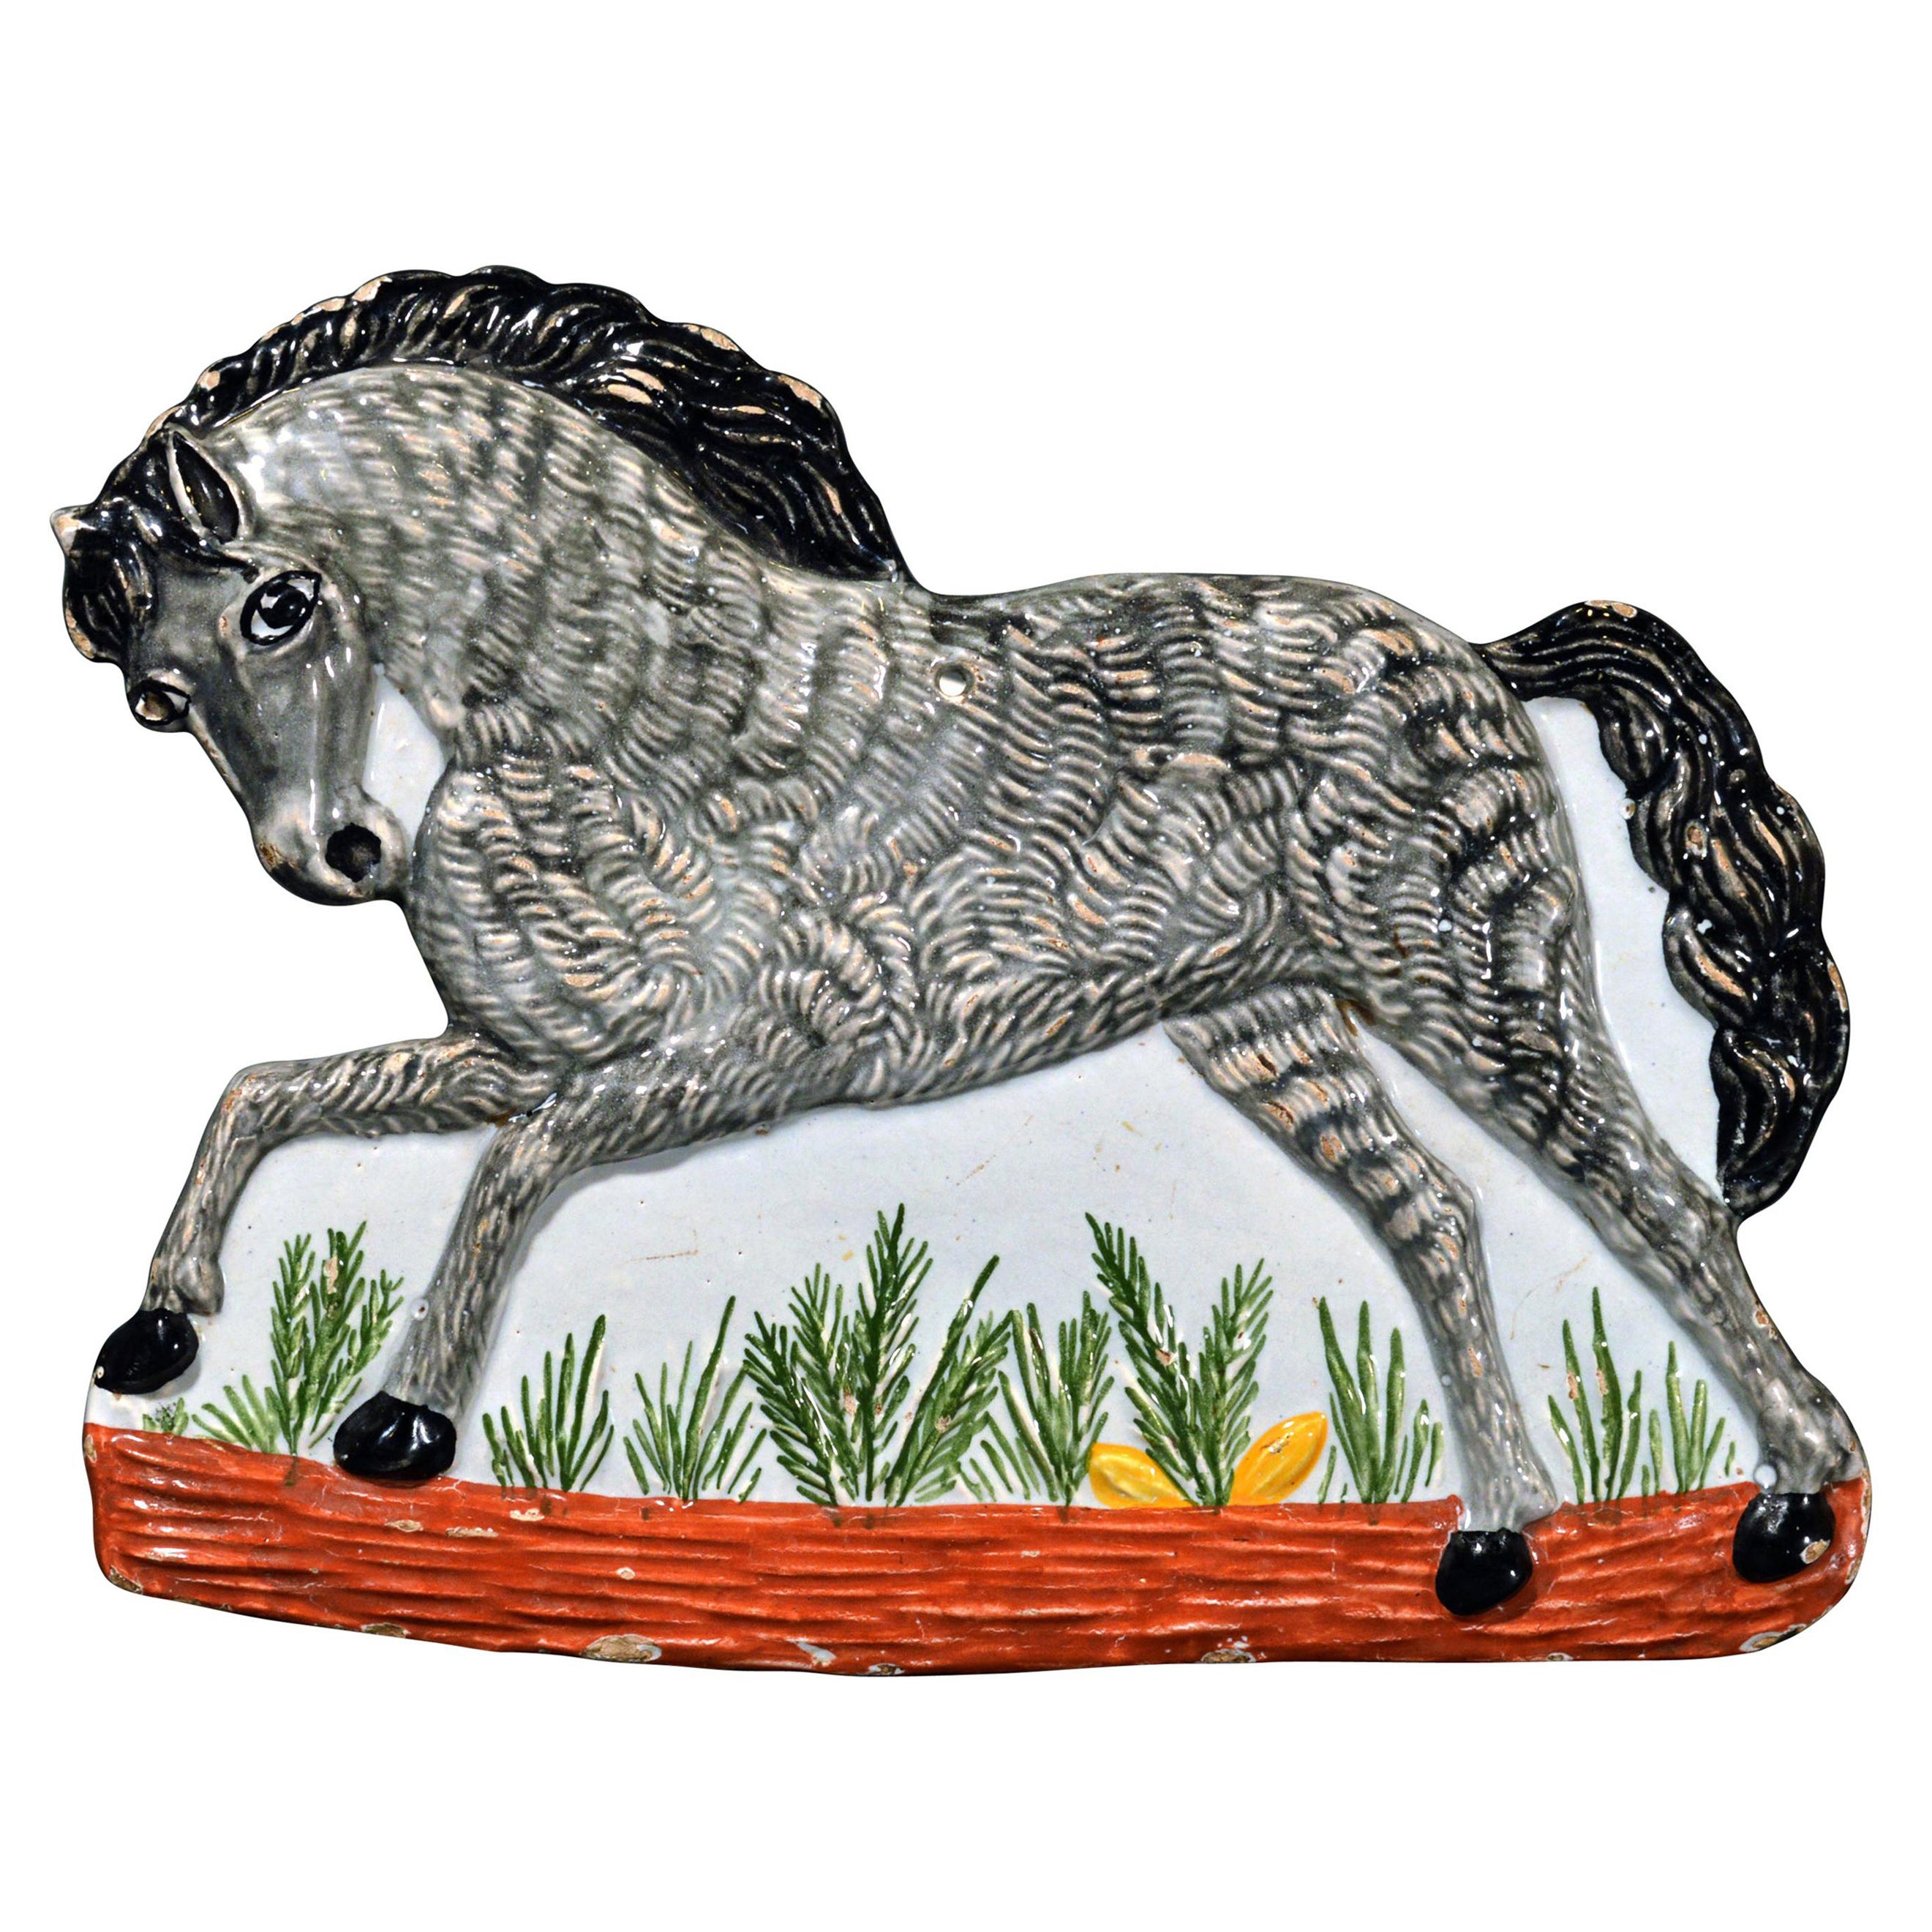 Faience Plaque in the Form of a Horse, circa 1840